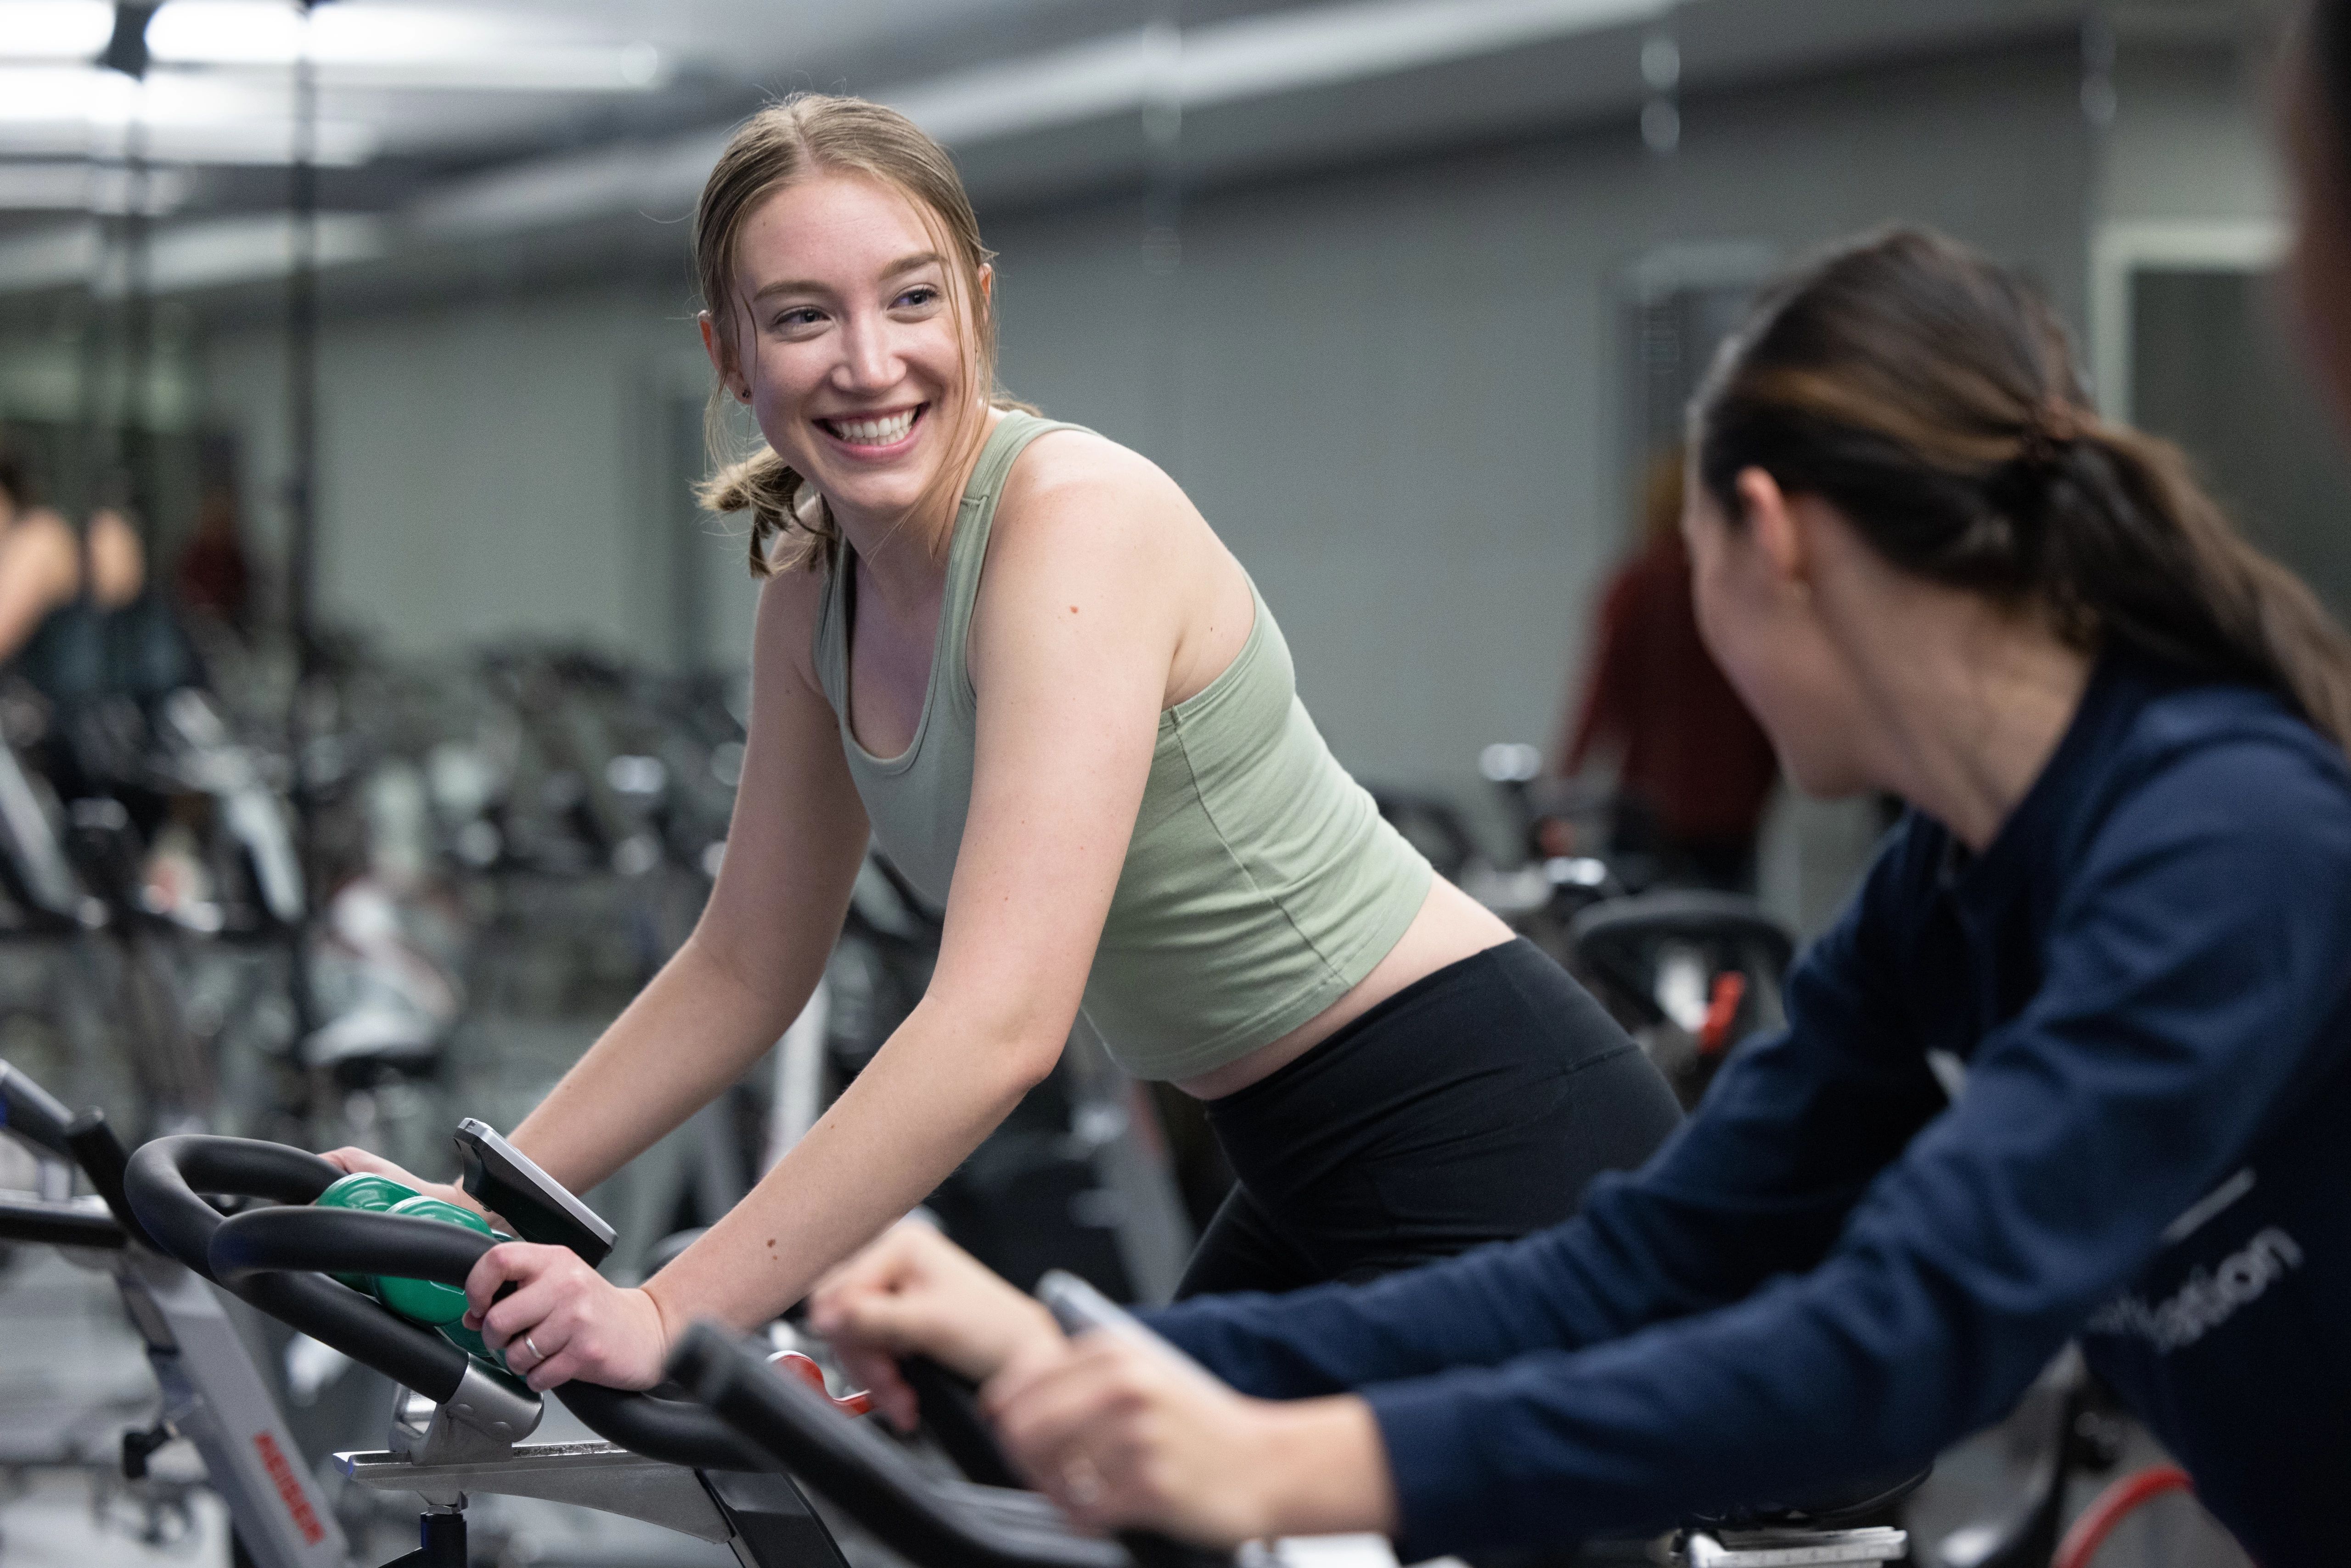 Student smiling while using exercise bike at N A U.